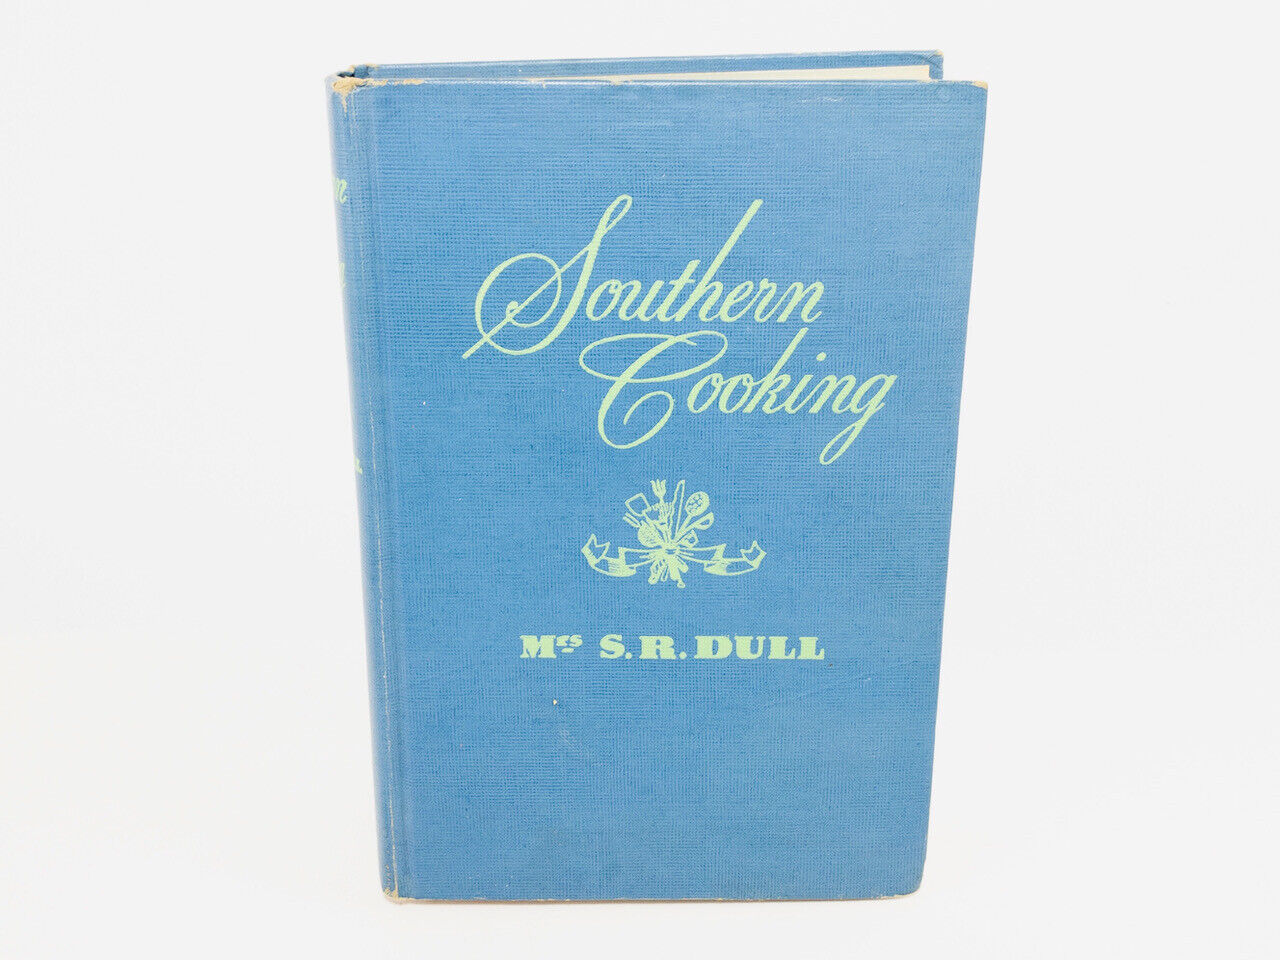 Southern Cooking by Mrs. S.R. Dull, 1941 HCDJ, Grosset & Dunlap, Very Good, Rare